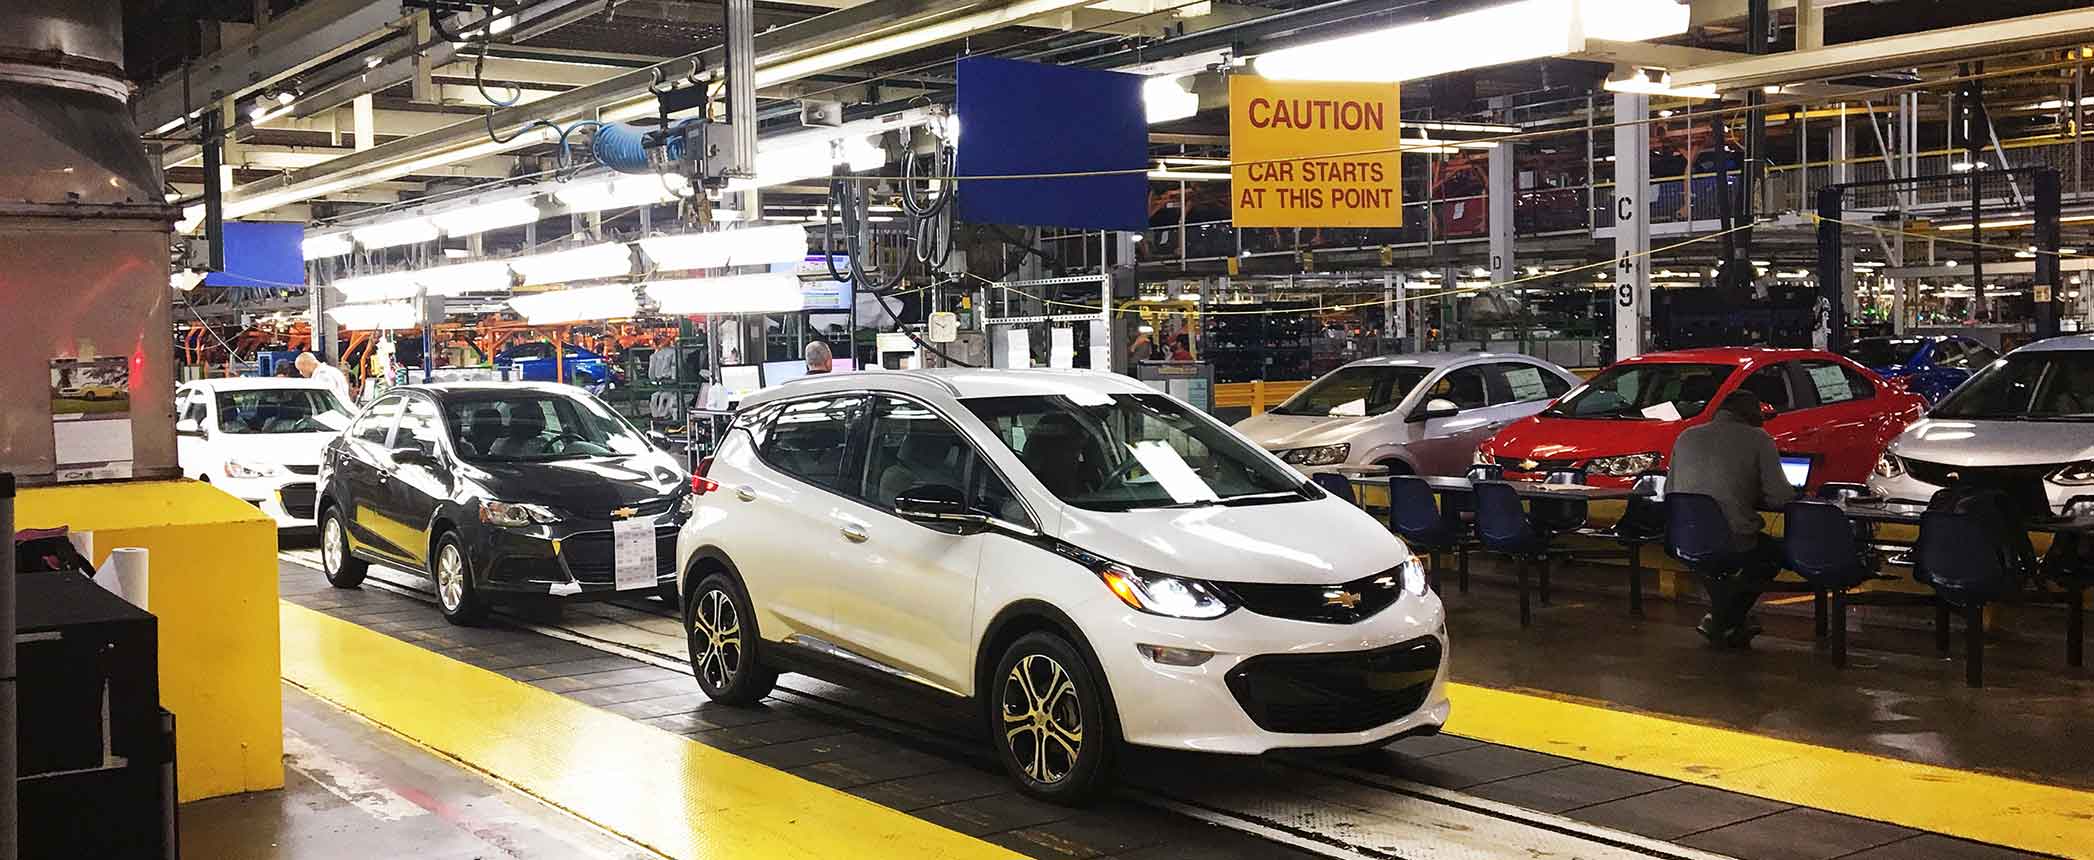 GM Solidifies its Position in the Electric Vehicle Arena